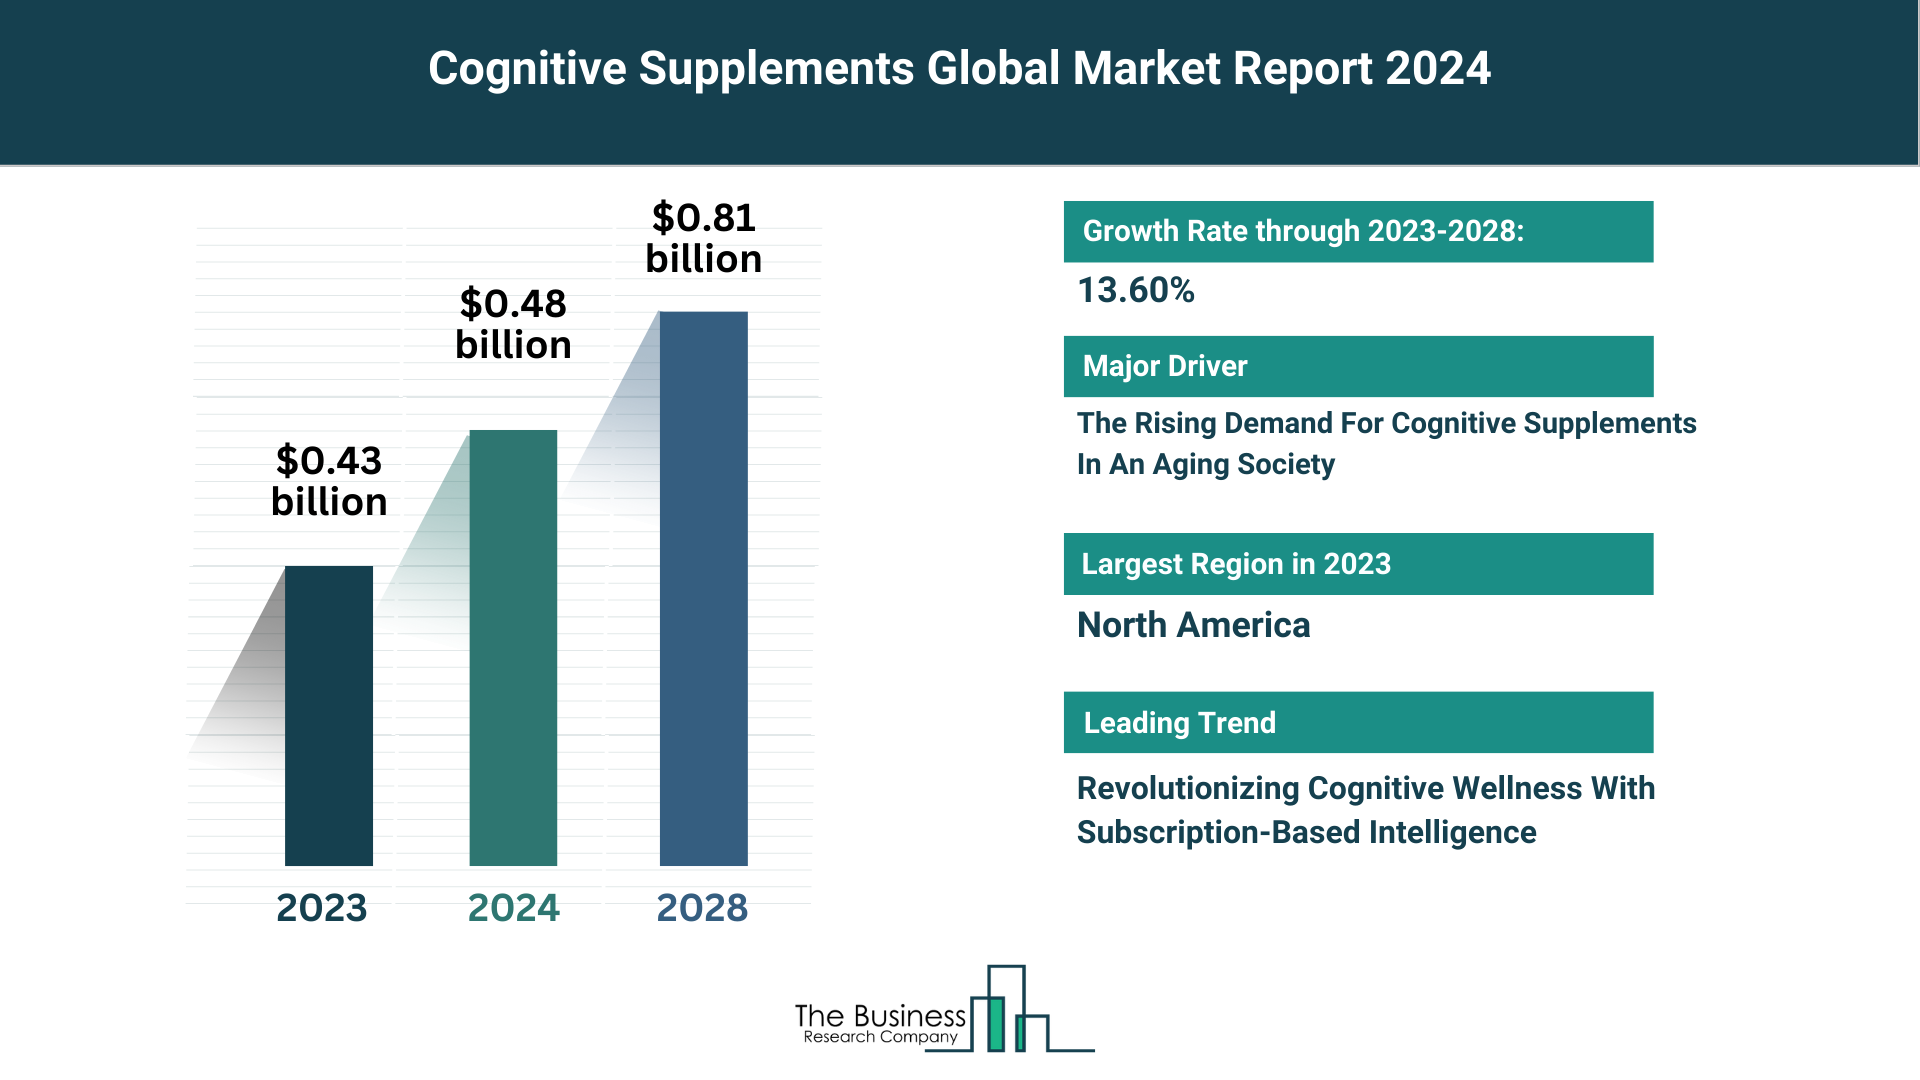 5 Key Takeaways From The Cognitive Supplements Market Report 2024